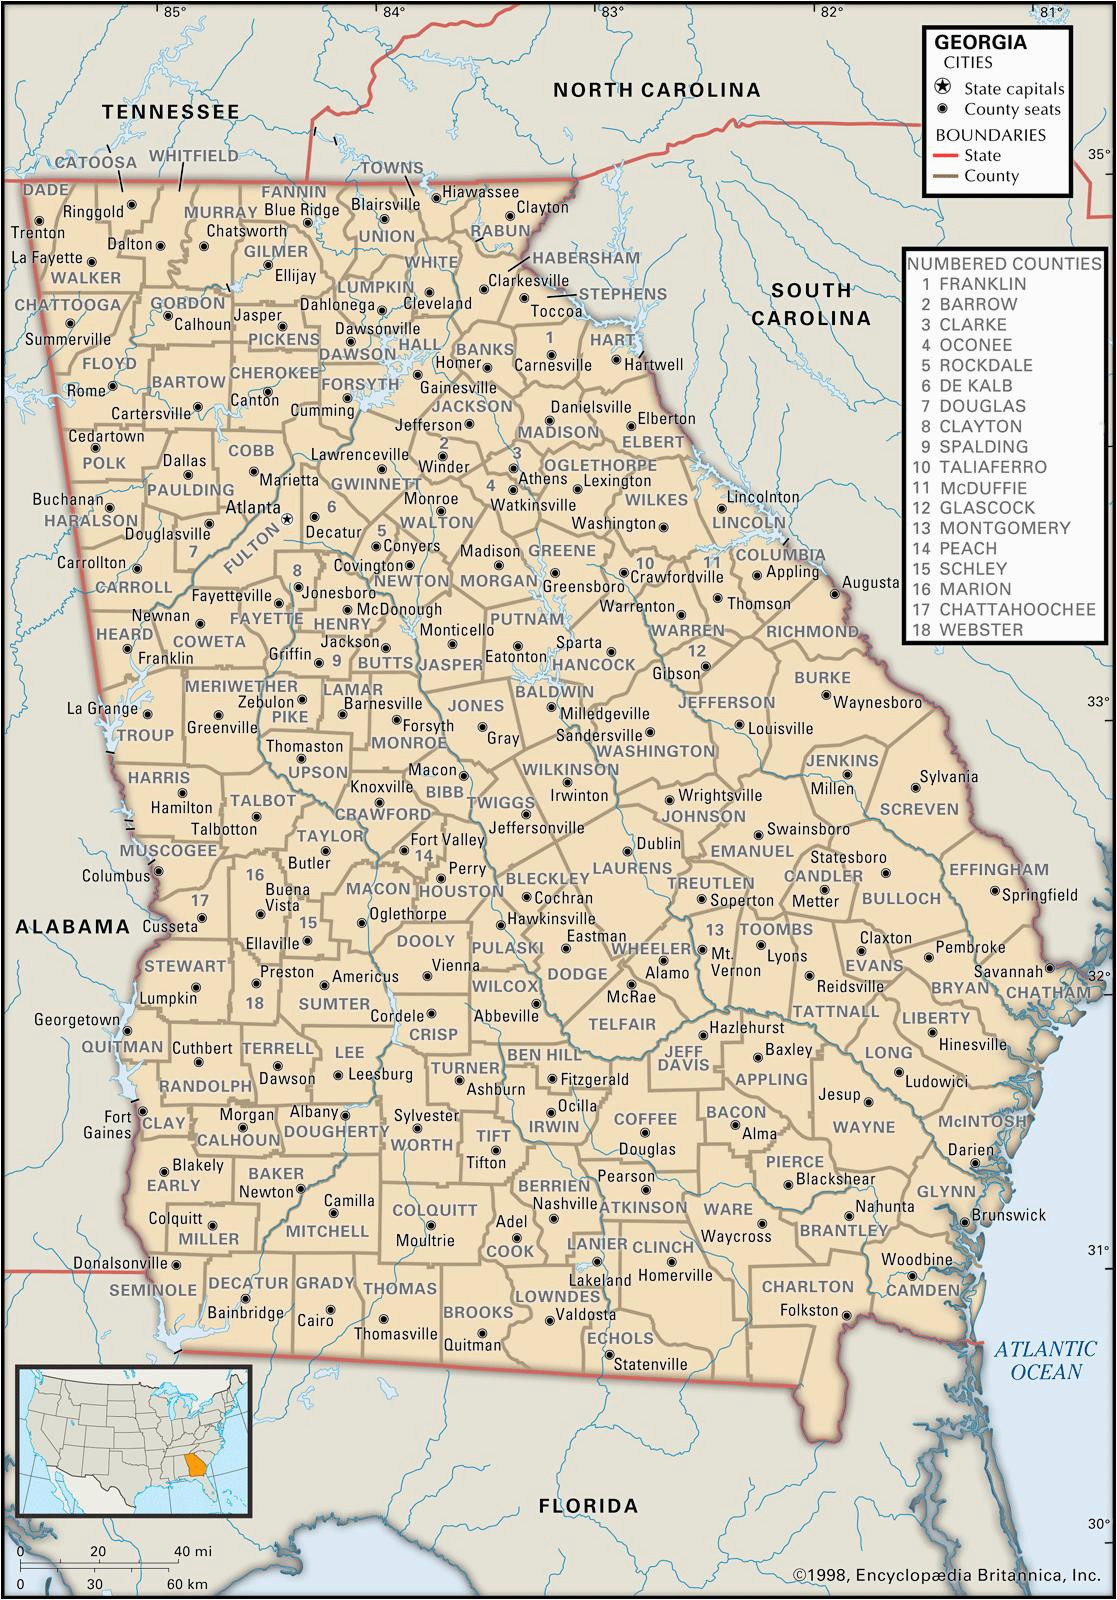 Colonial Georgia Map State and County Maps Of Georgia